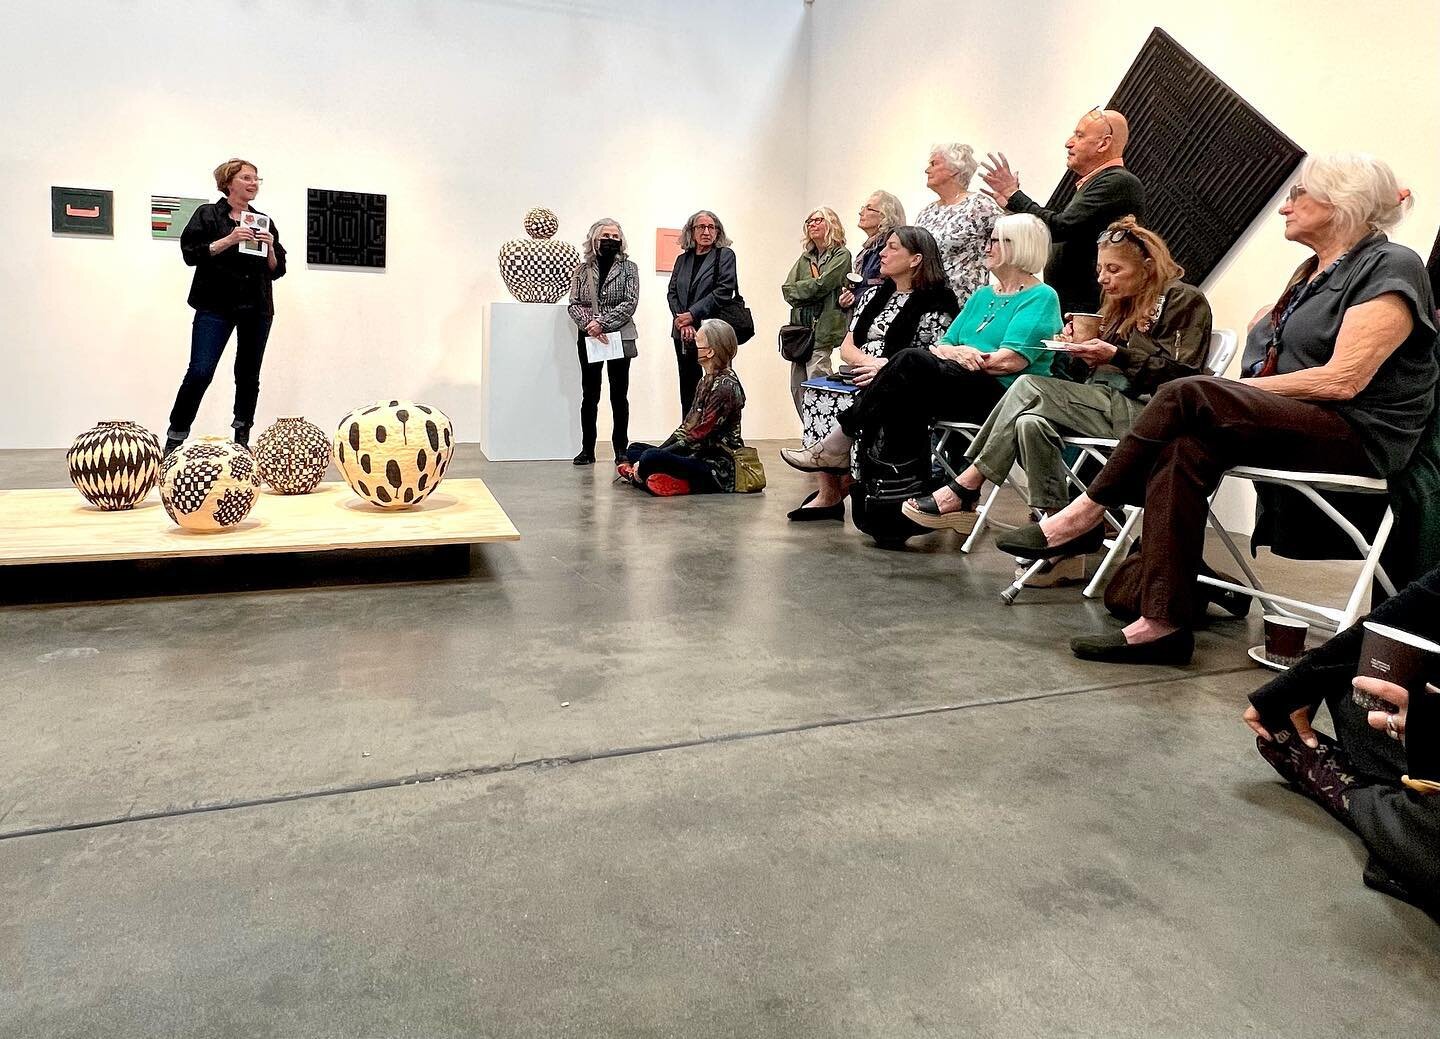 Gallery talk today was engaging and enjoyable.
Thank you to Tanja Rector, Nancy Monk and DJ Hall. (Photos by @sloanprojects)
.
@tantan4me @nancy_monk @djhallartist